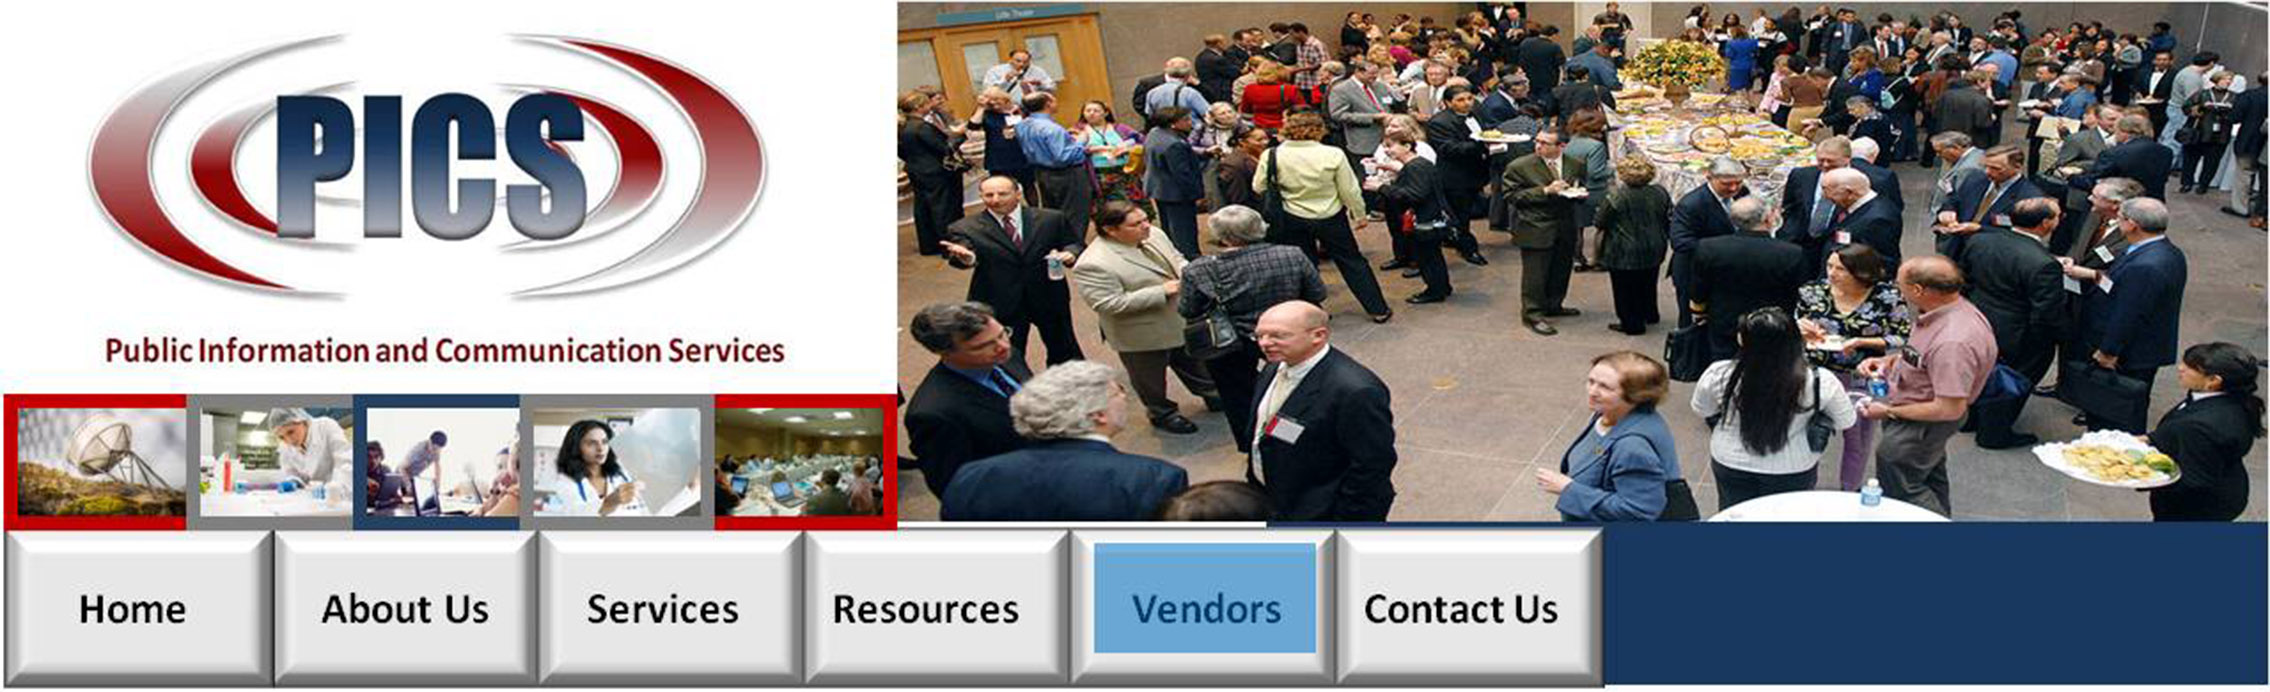 Top Photo with PICS logo and photo of people mingling at a conference